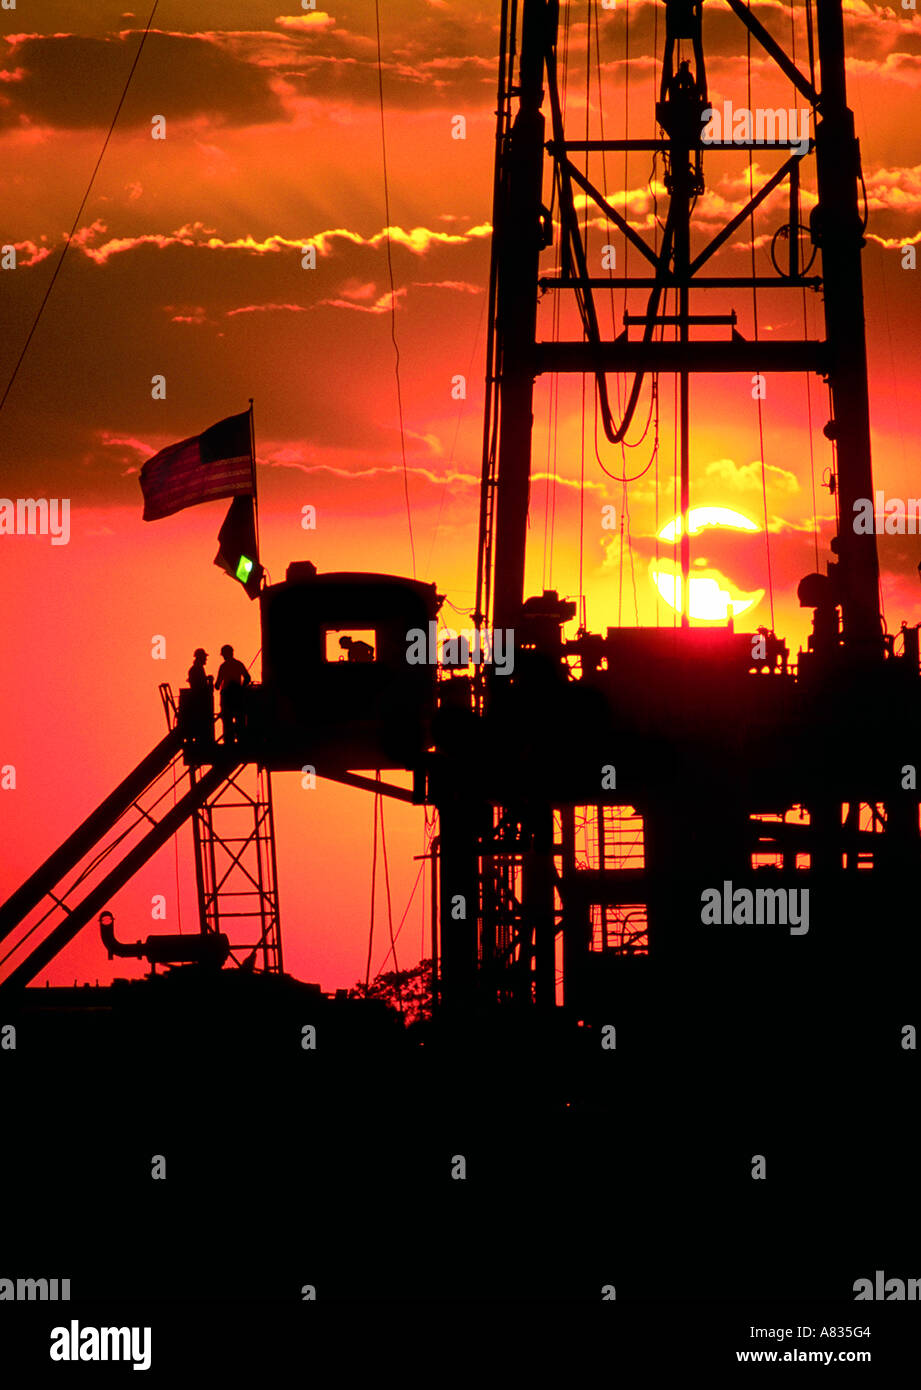 Oil Rig with Workers Stock Photo